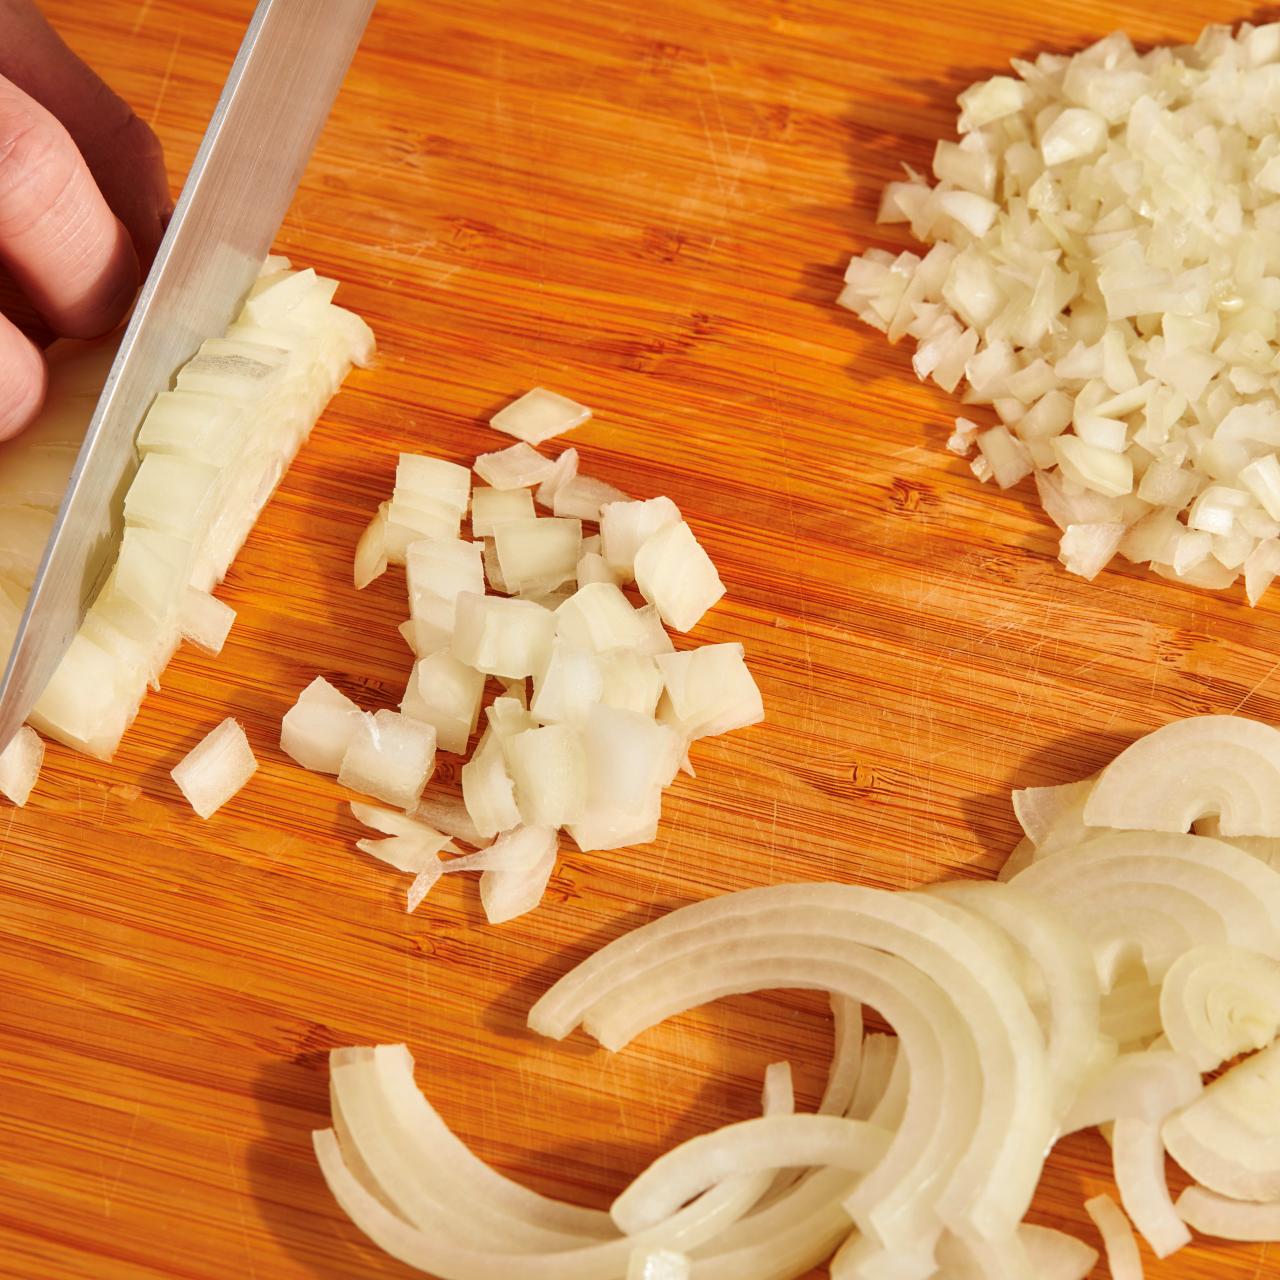 How To Cut Onions Like A Pro, Different Ways To Chop An Onion